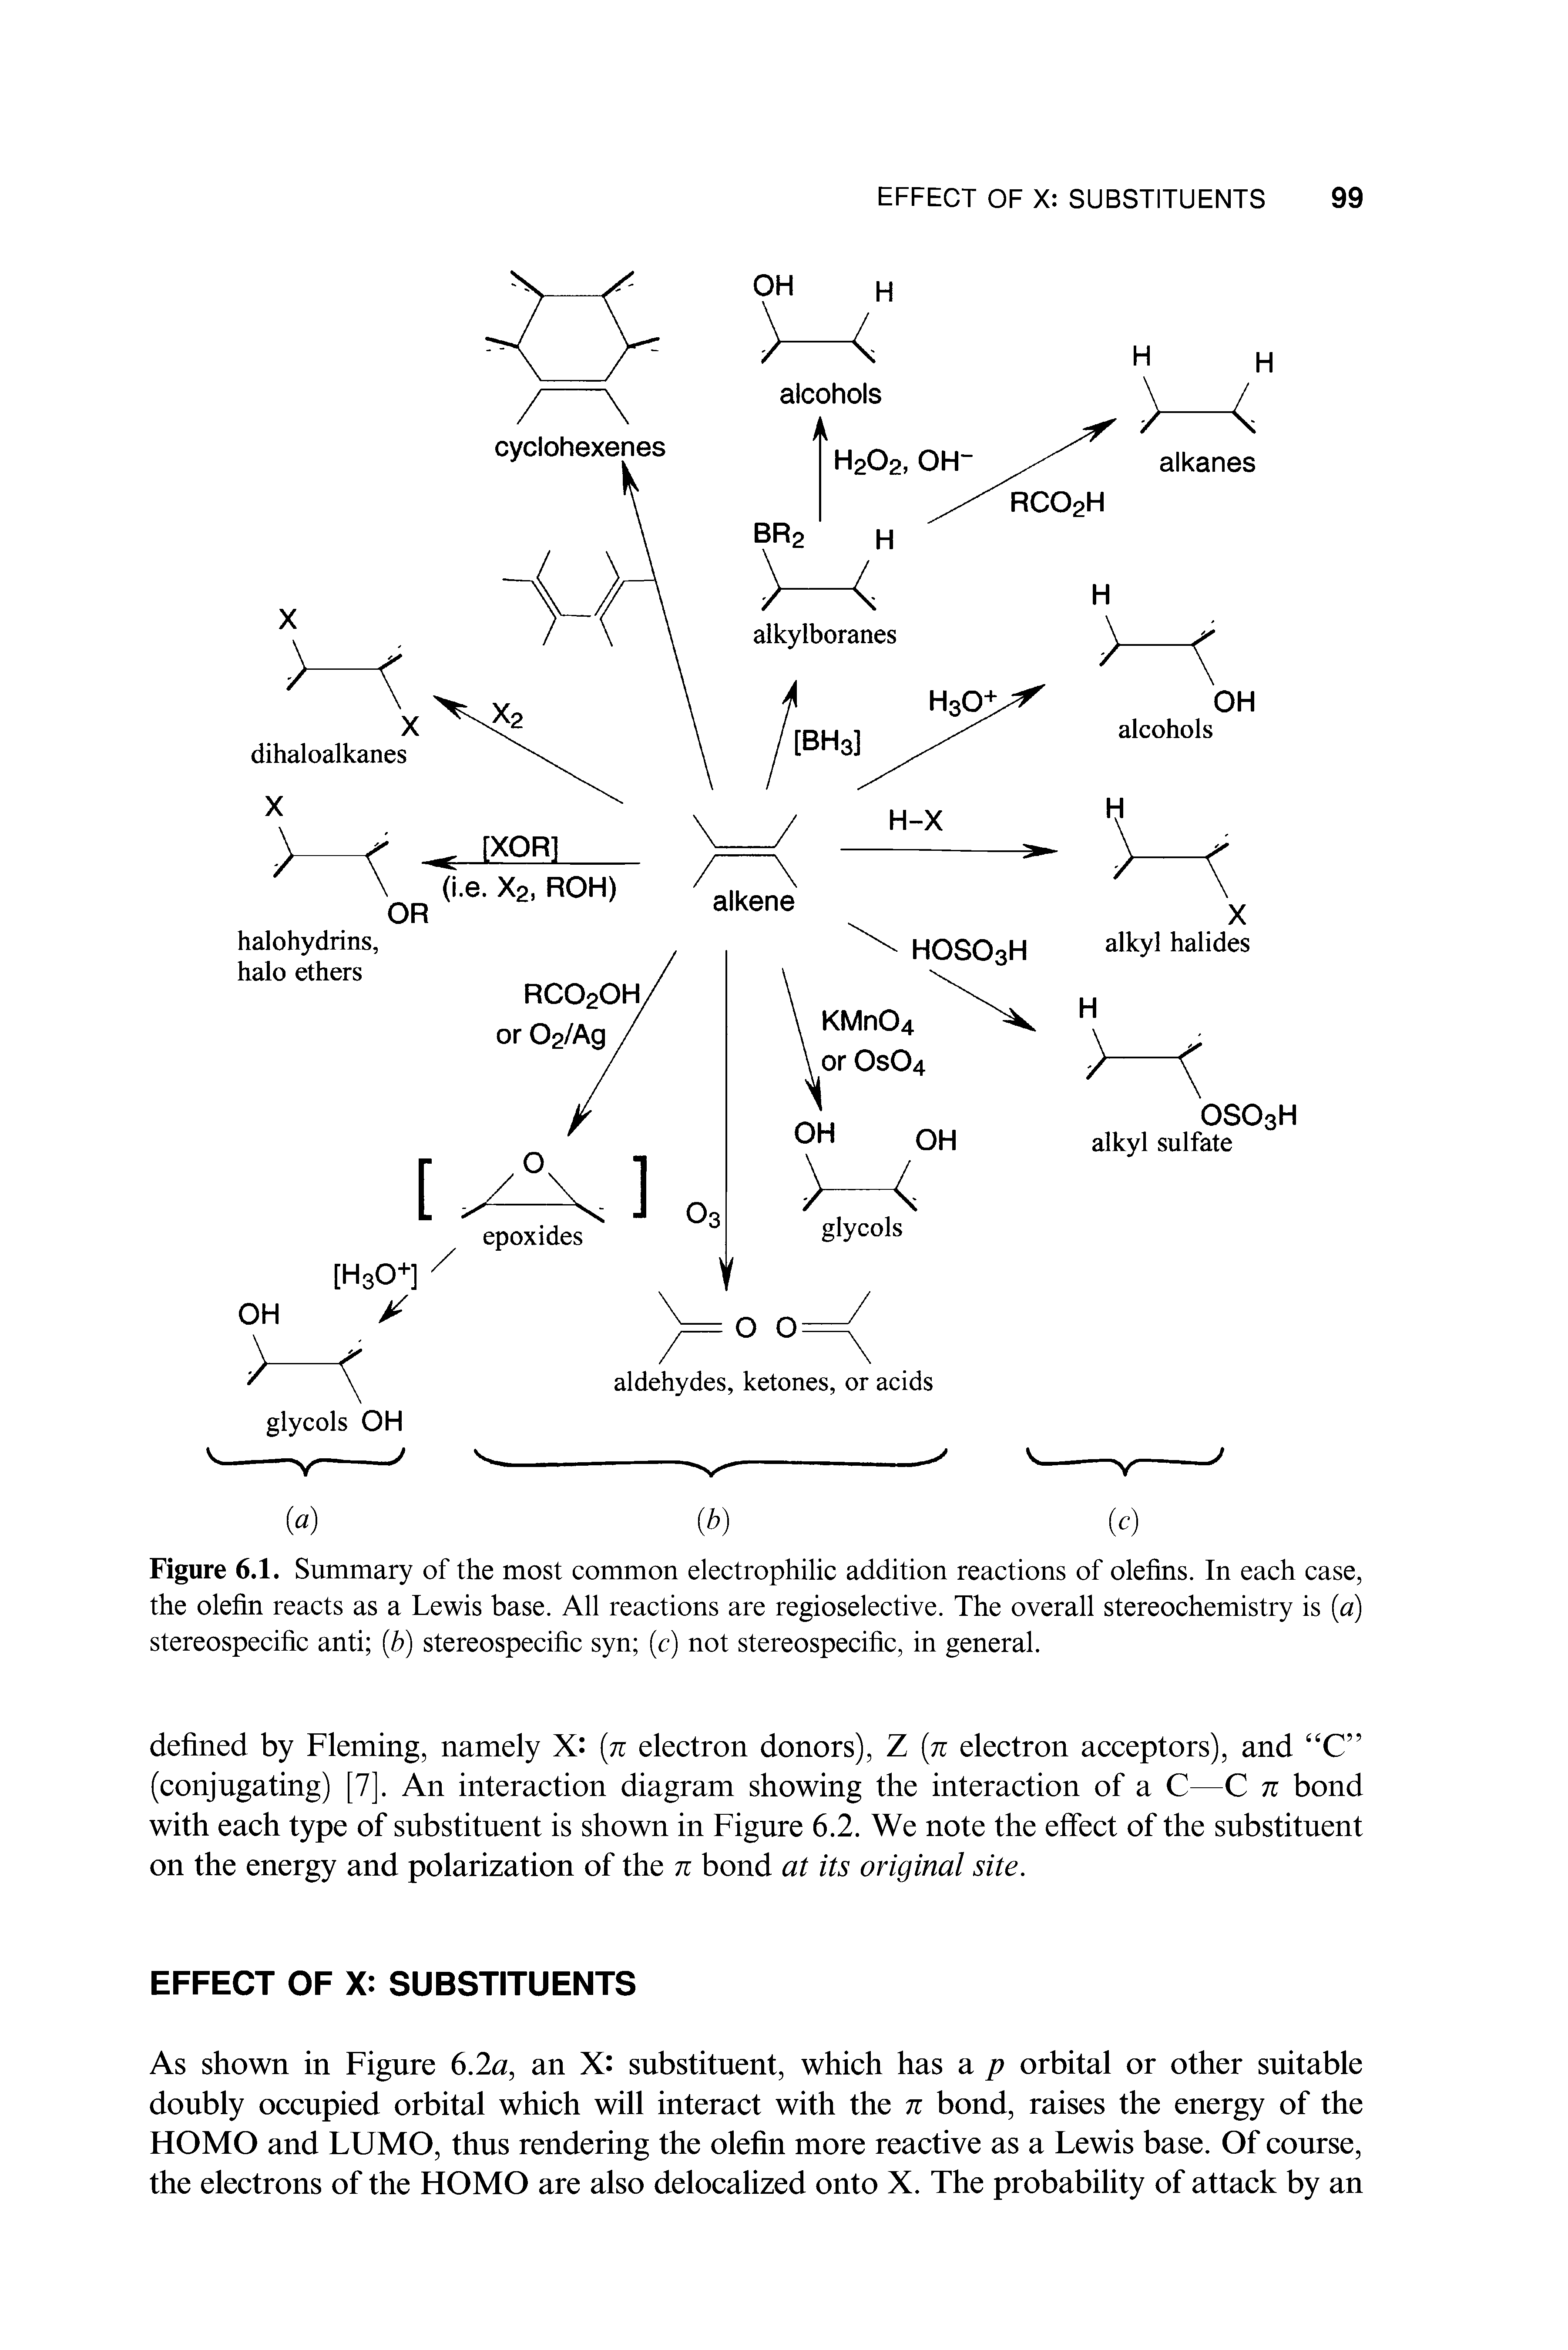 Figure 6.1. Summary of the most common electrophilic addition reactions of olefins. In each case, the olefin reacts as a Lewis base. All reactions are regioselective. The overall stereochemistry is (a) stereospecific anti (b) stereospecific syn (c) not stereospecific, in general.